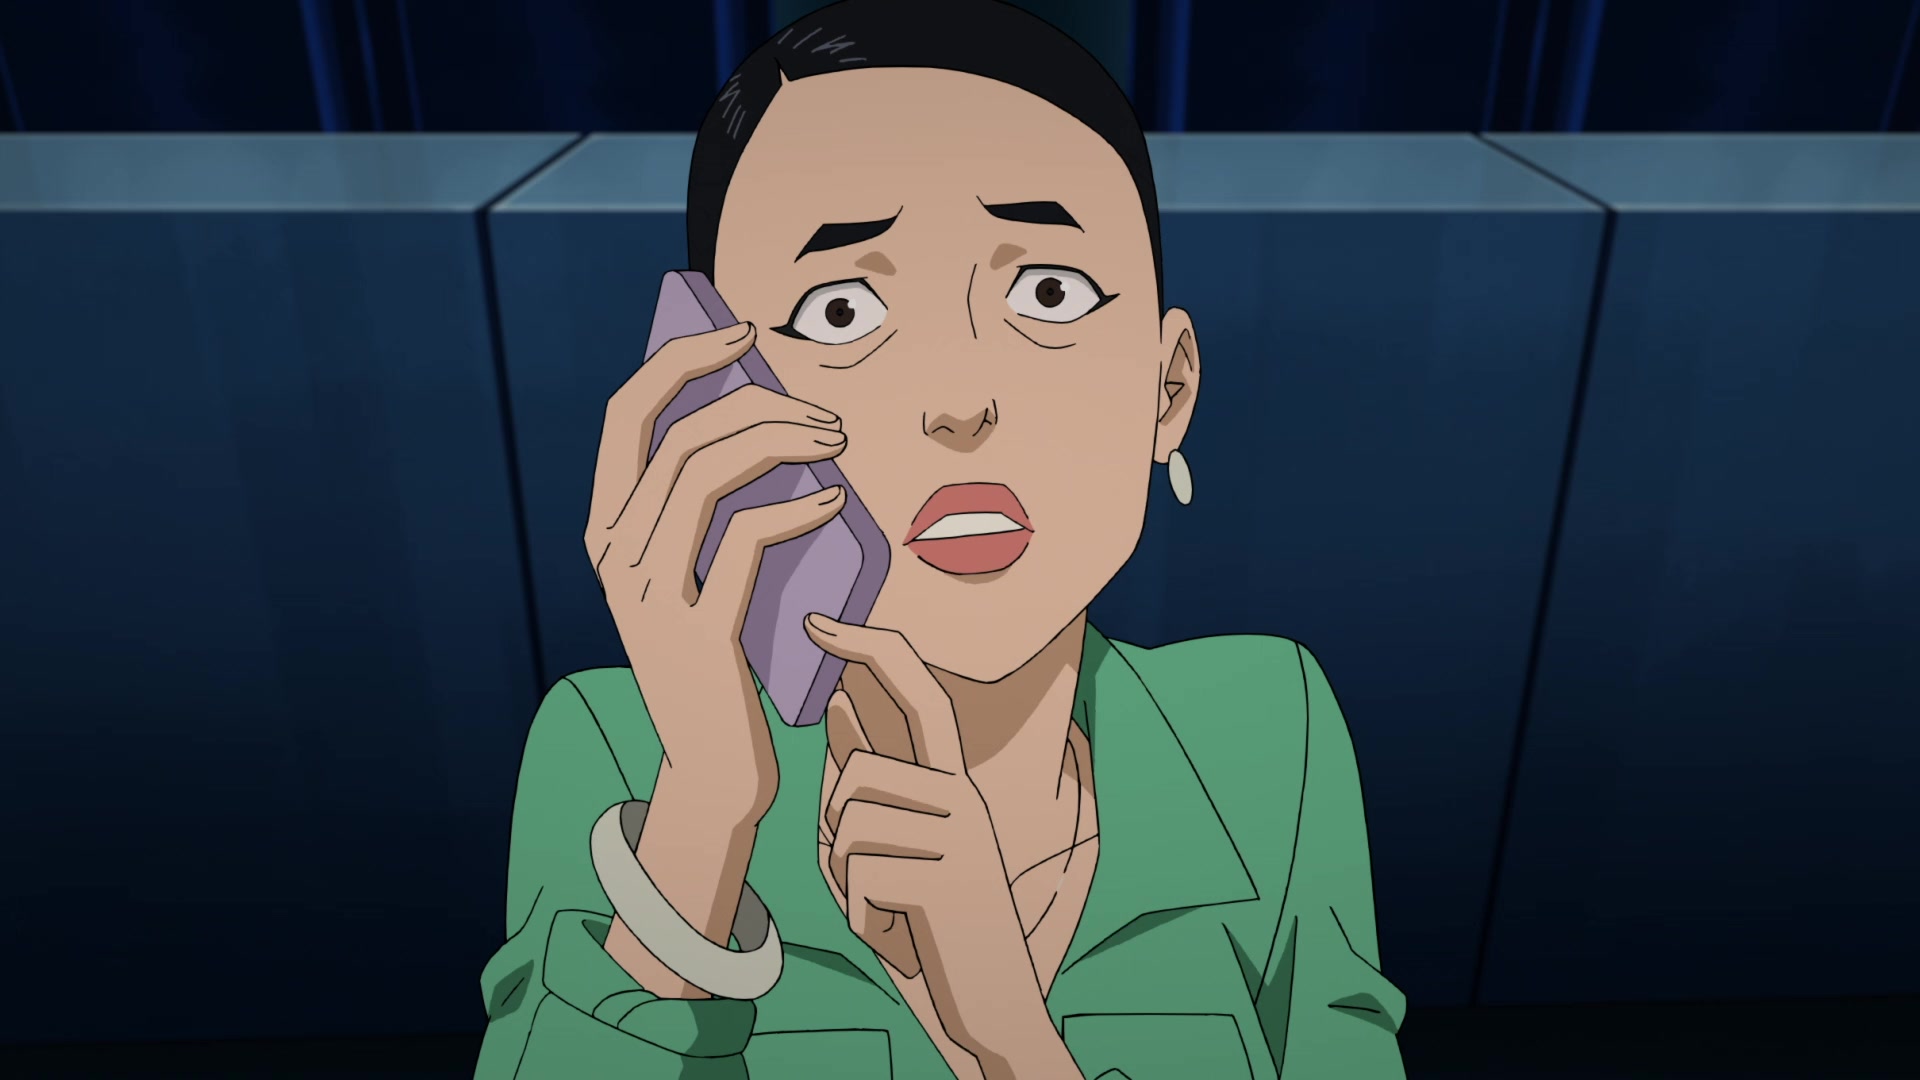 Debbie Grayson (Sandra Oh) tries to warn Atom Eve (Gillian Jacobs) and Invincible (Steven Yeun) about Omni-Man's (J.K. Simmons) heel turn in Invincible Season 1 Episode 7 "We Need To Talk" (2021), Amazon